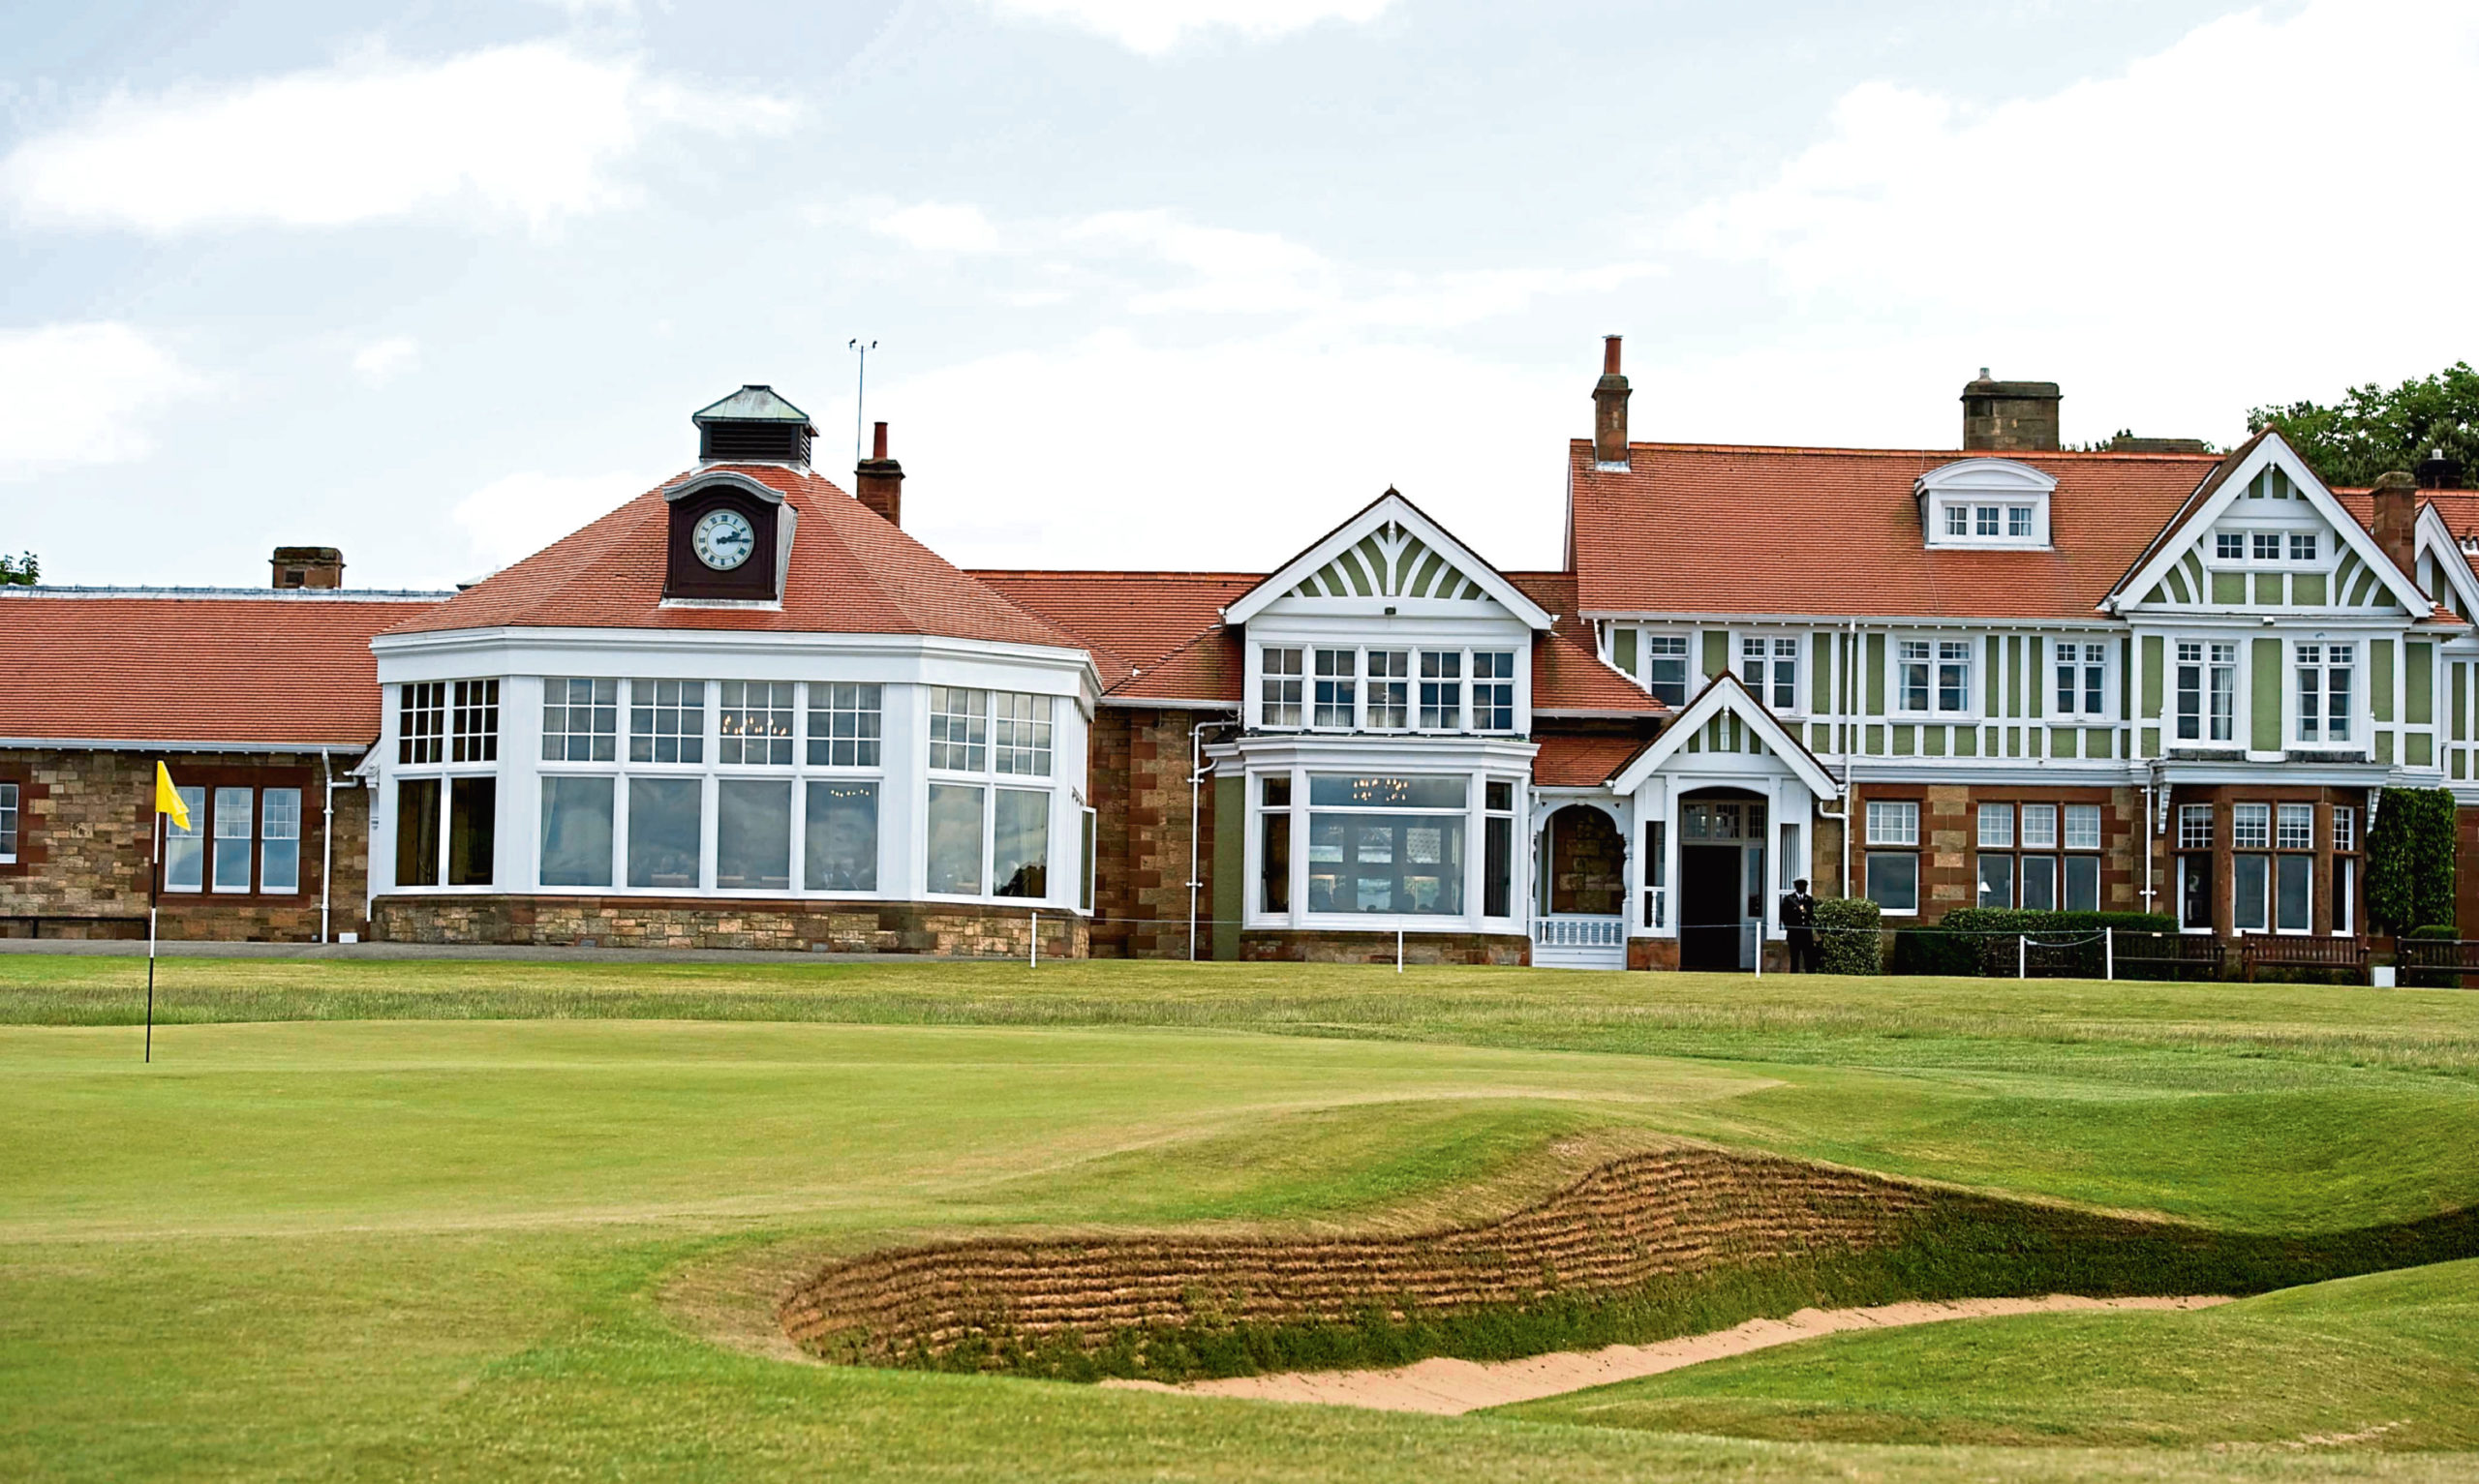 19/06/10 AMATEUR CHAMPIONSHIPS
MUIRFIELD
Clubhouse